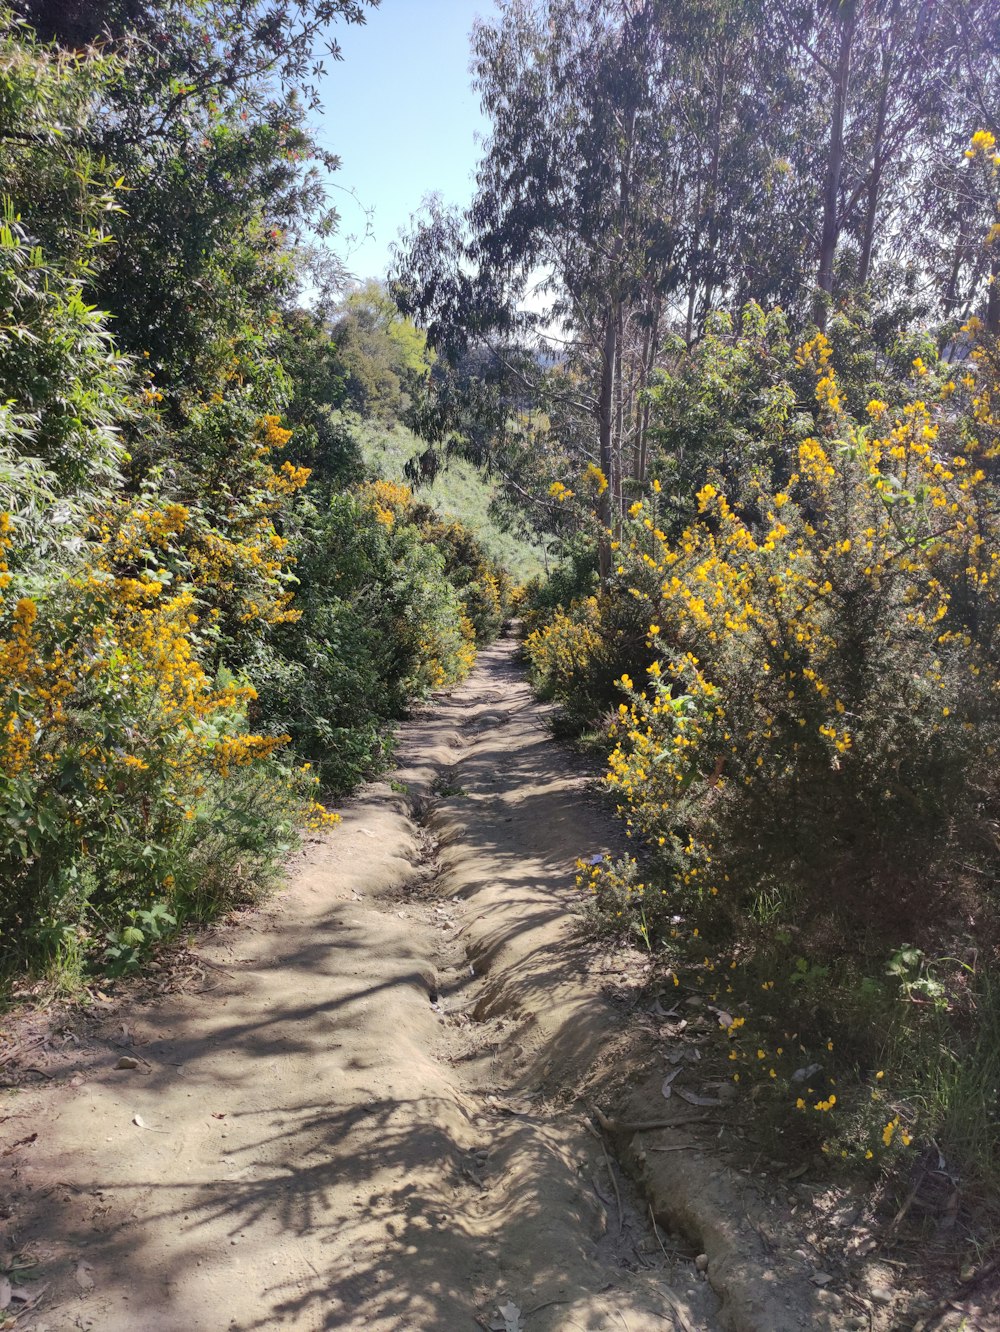 a dirt road surrounded by trees and yellow flowers